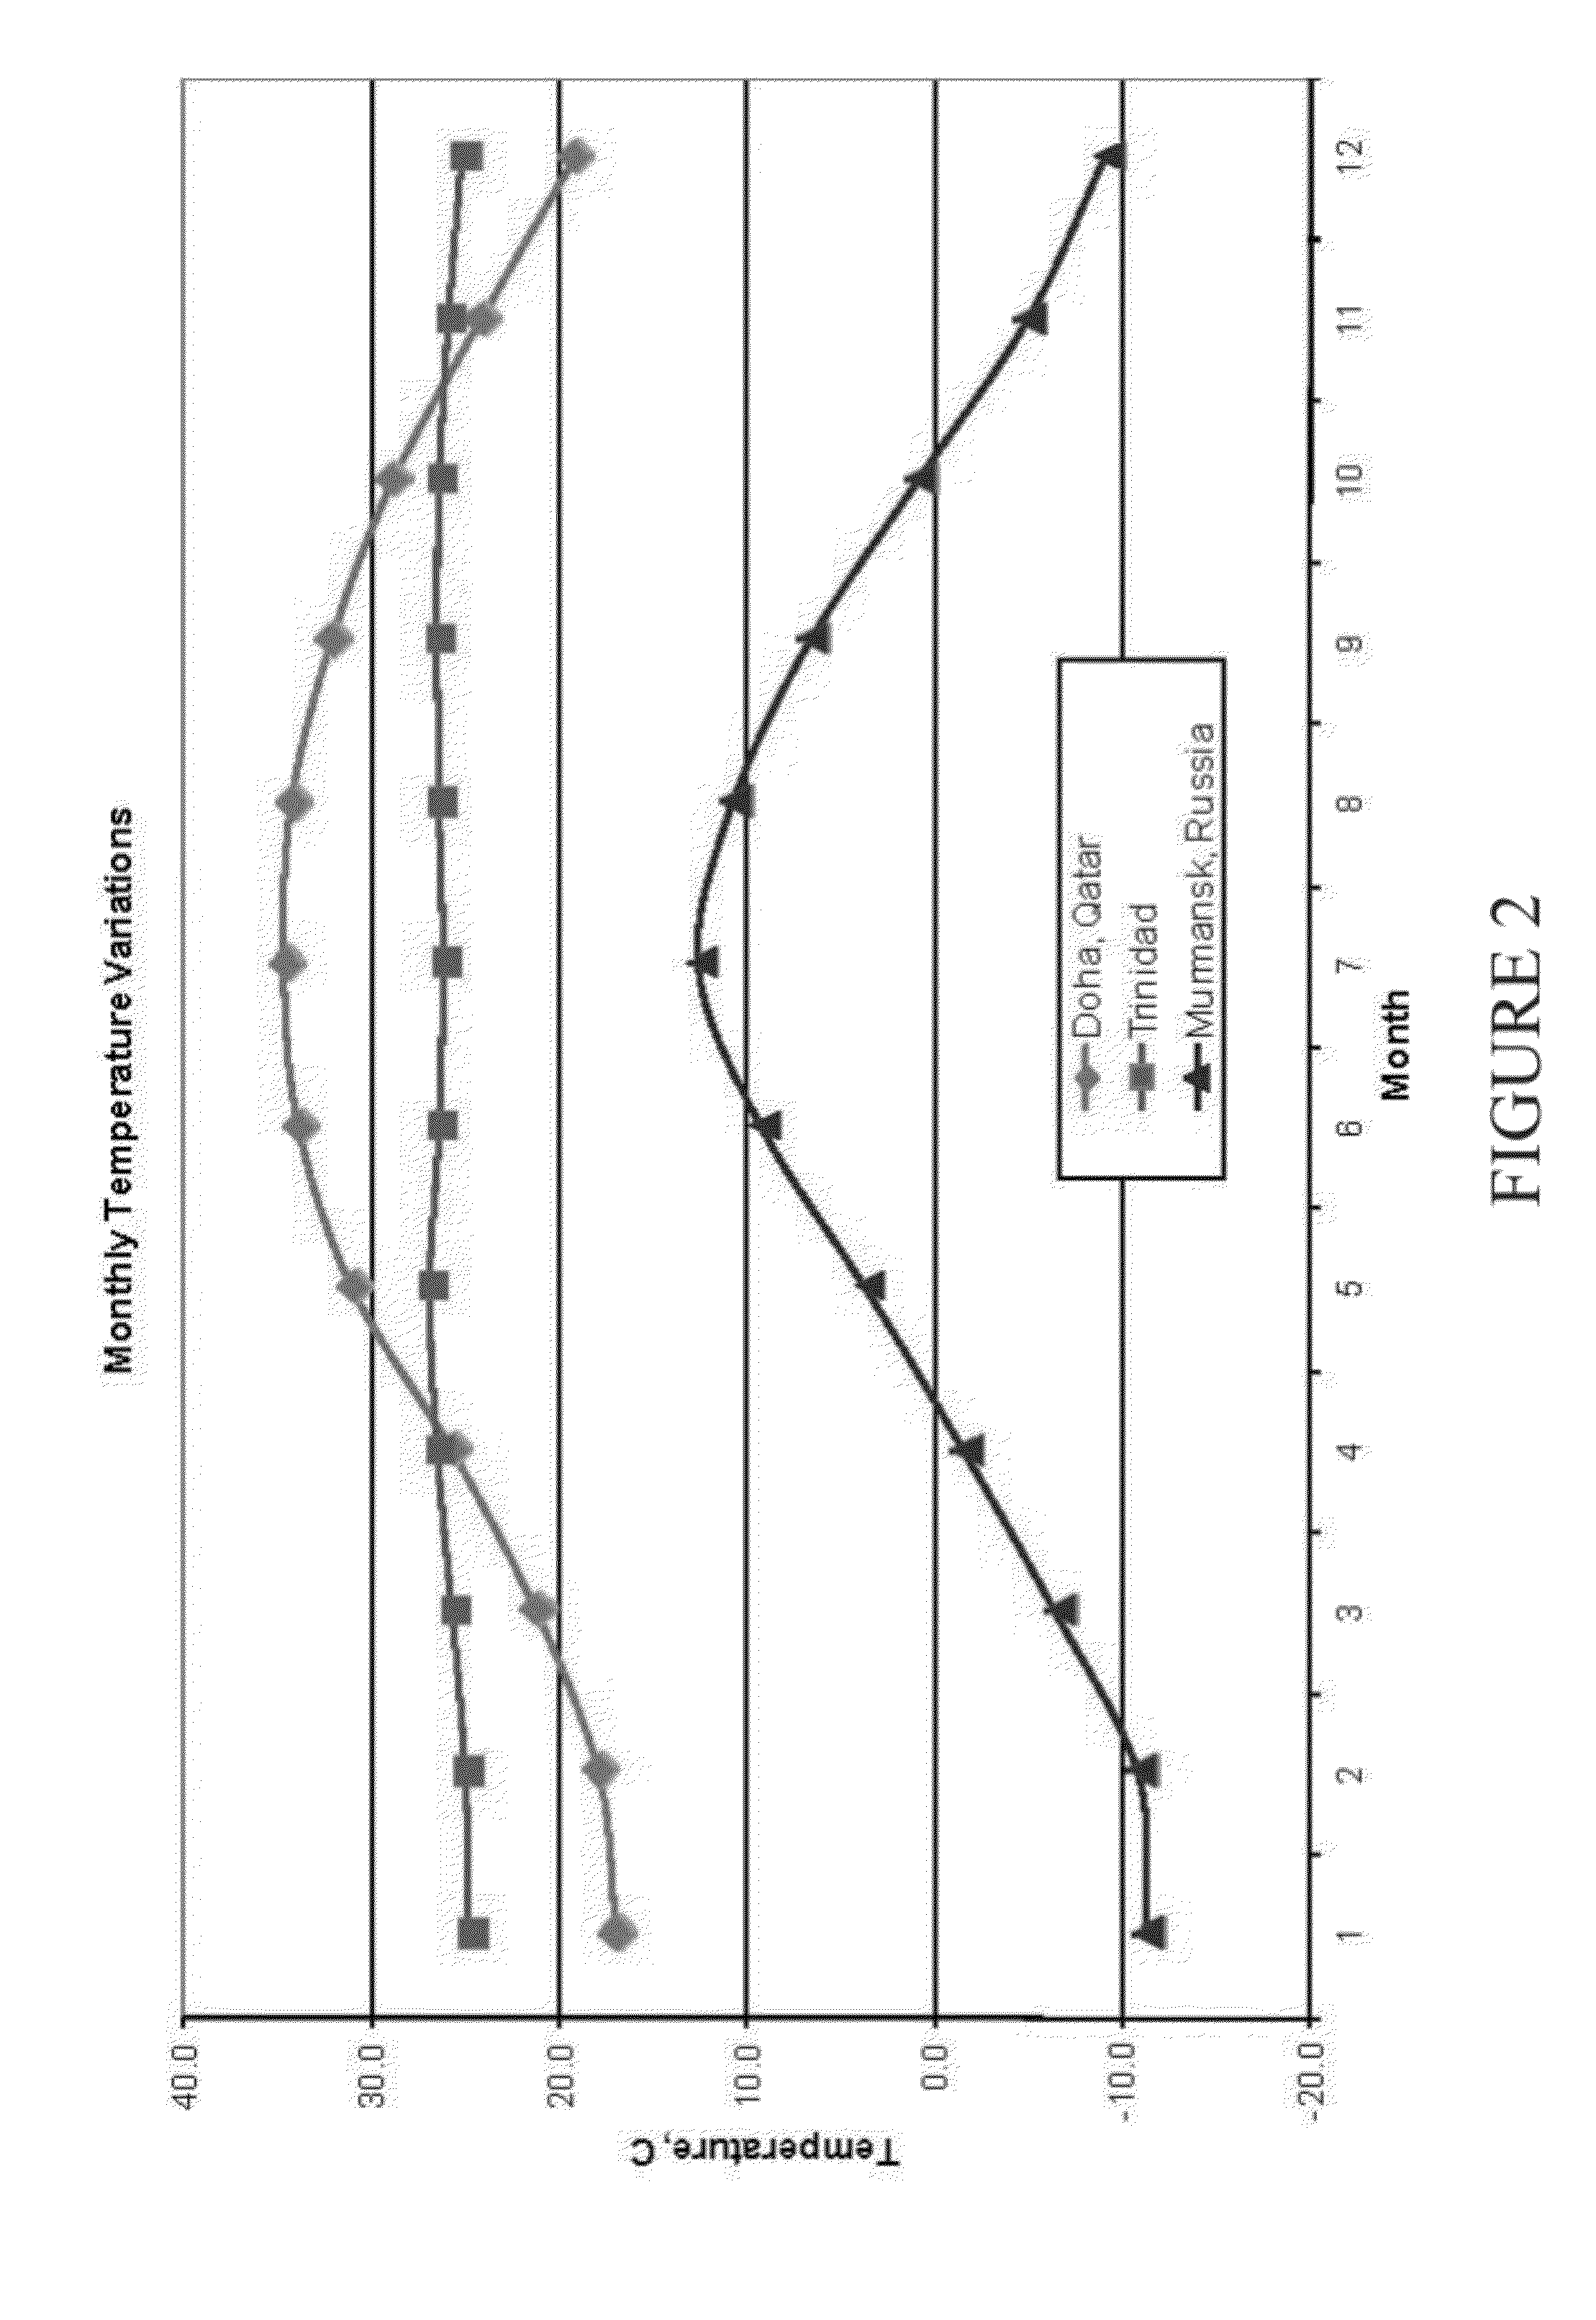 Use of refrigeration loops to chill inlet air to gas turbine